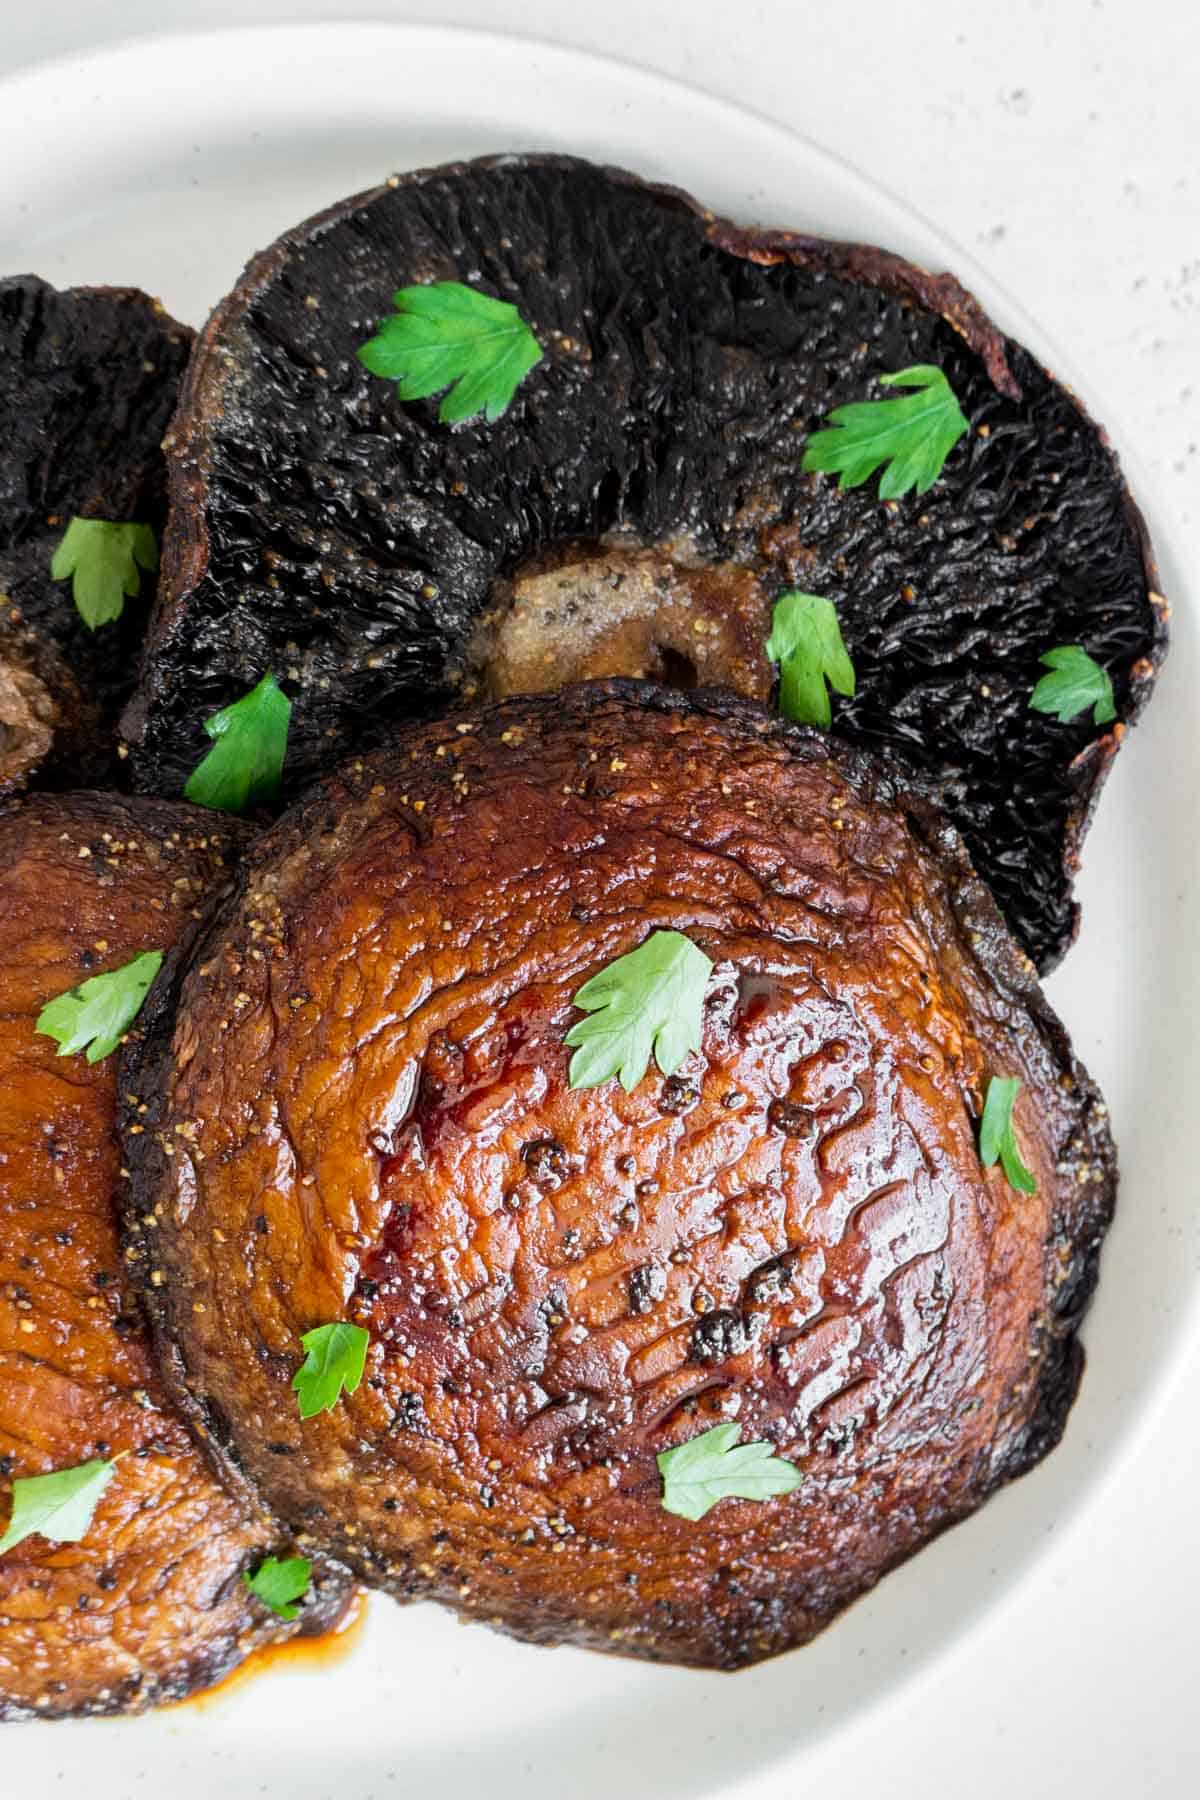 Overhead view of a plate with air fryer portobello mushrooms with parsley on top.